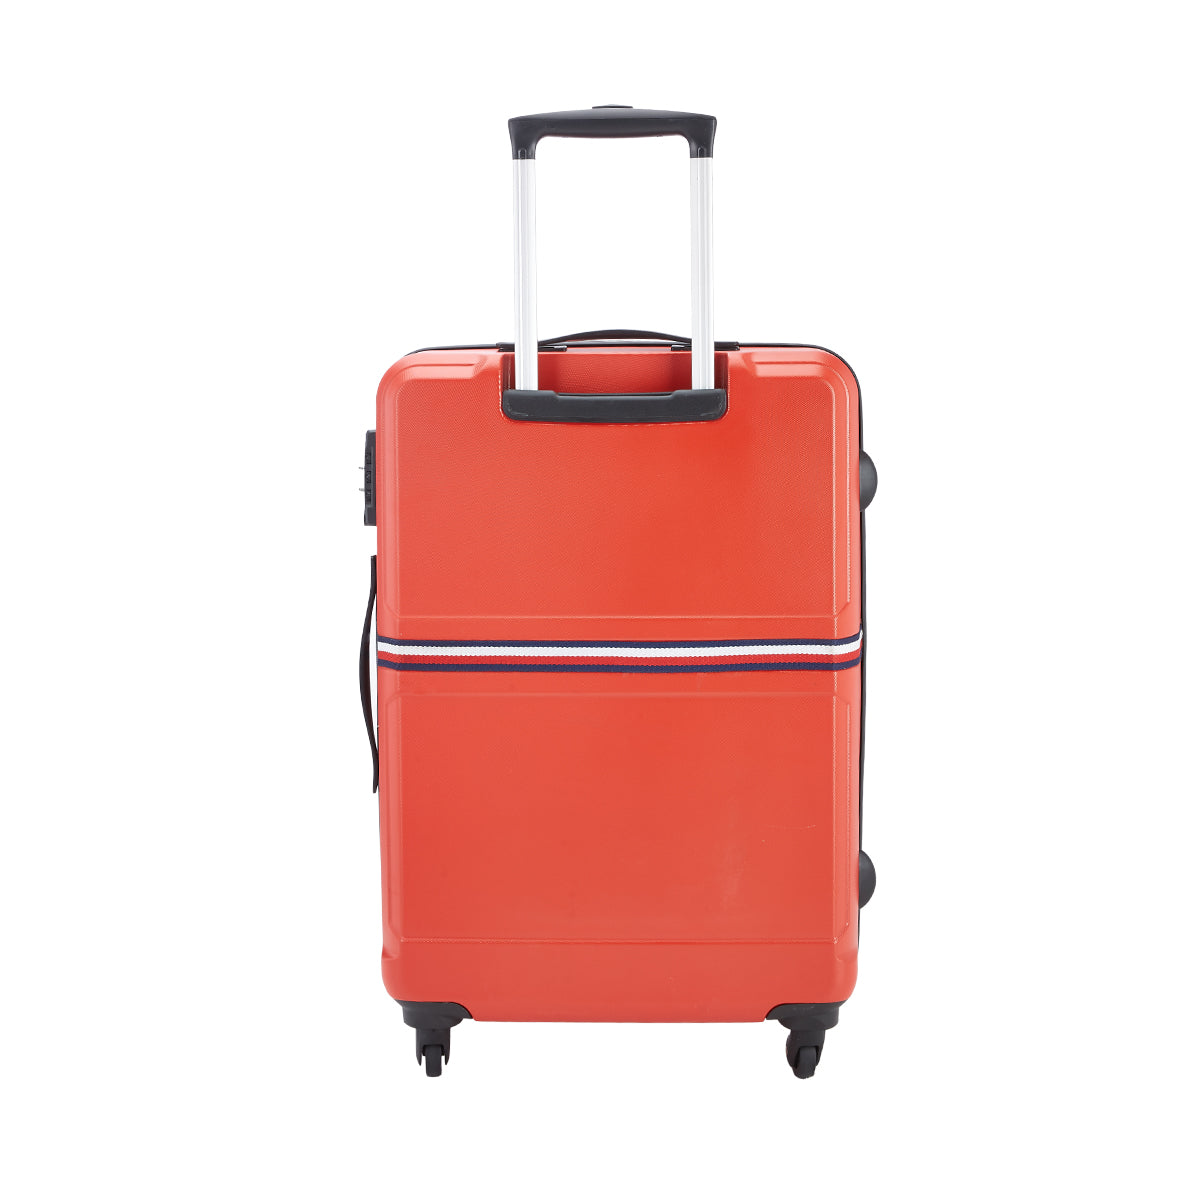 Tommy Hilfiger Marshall Hard Luggage Red